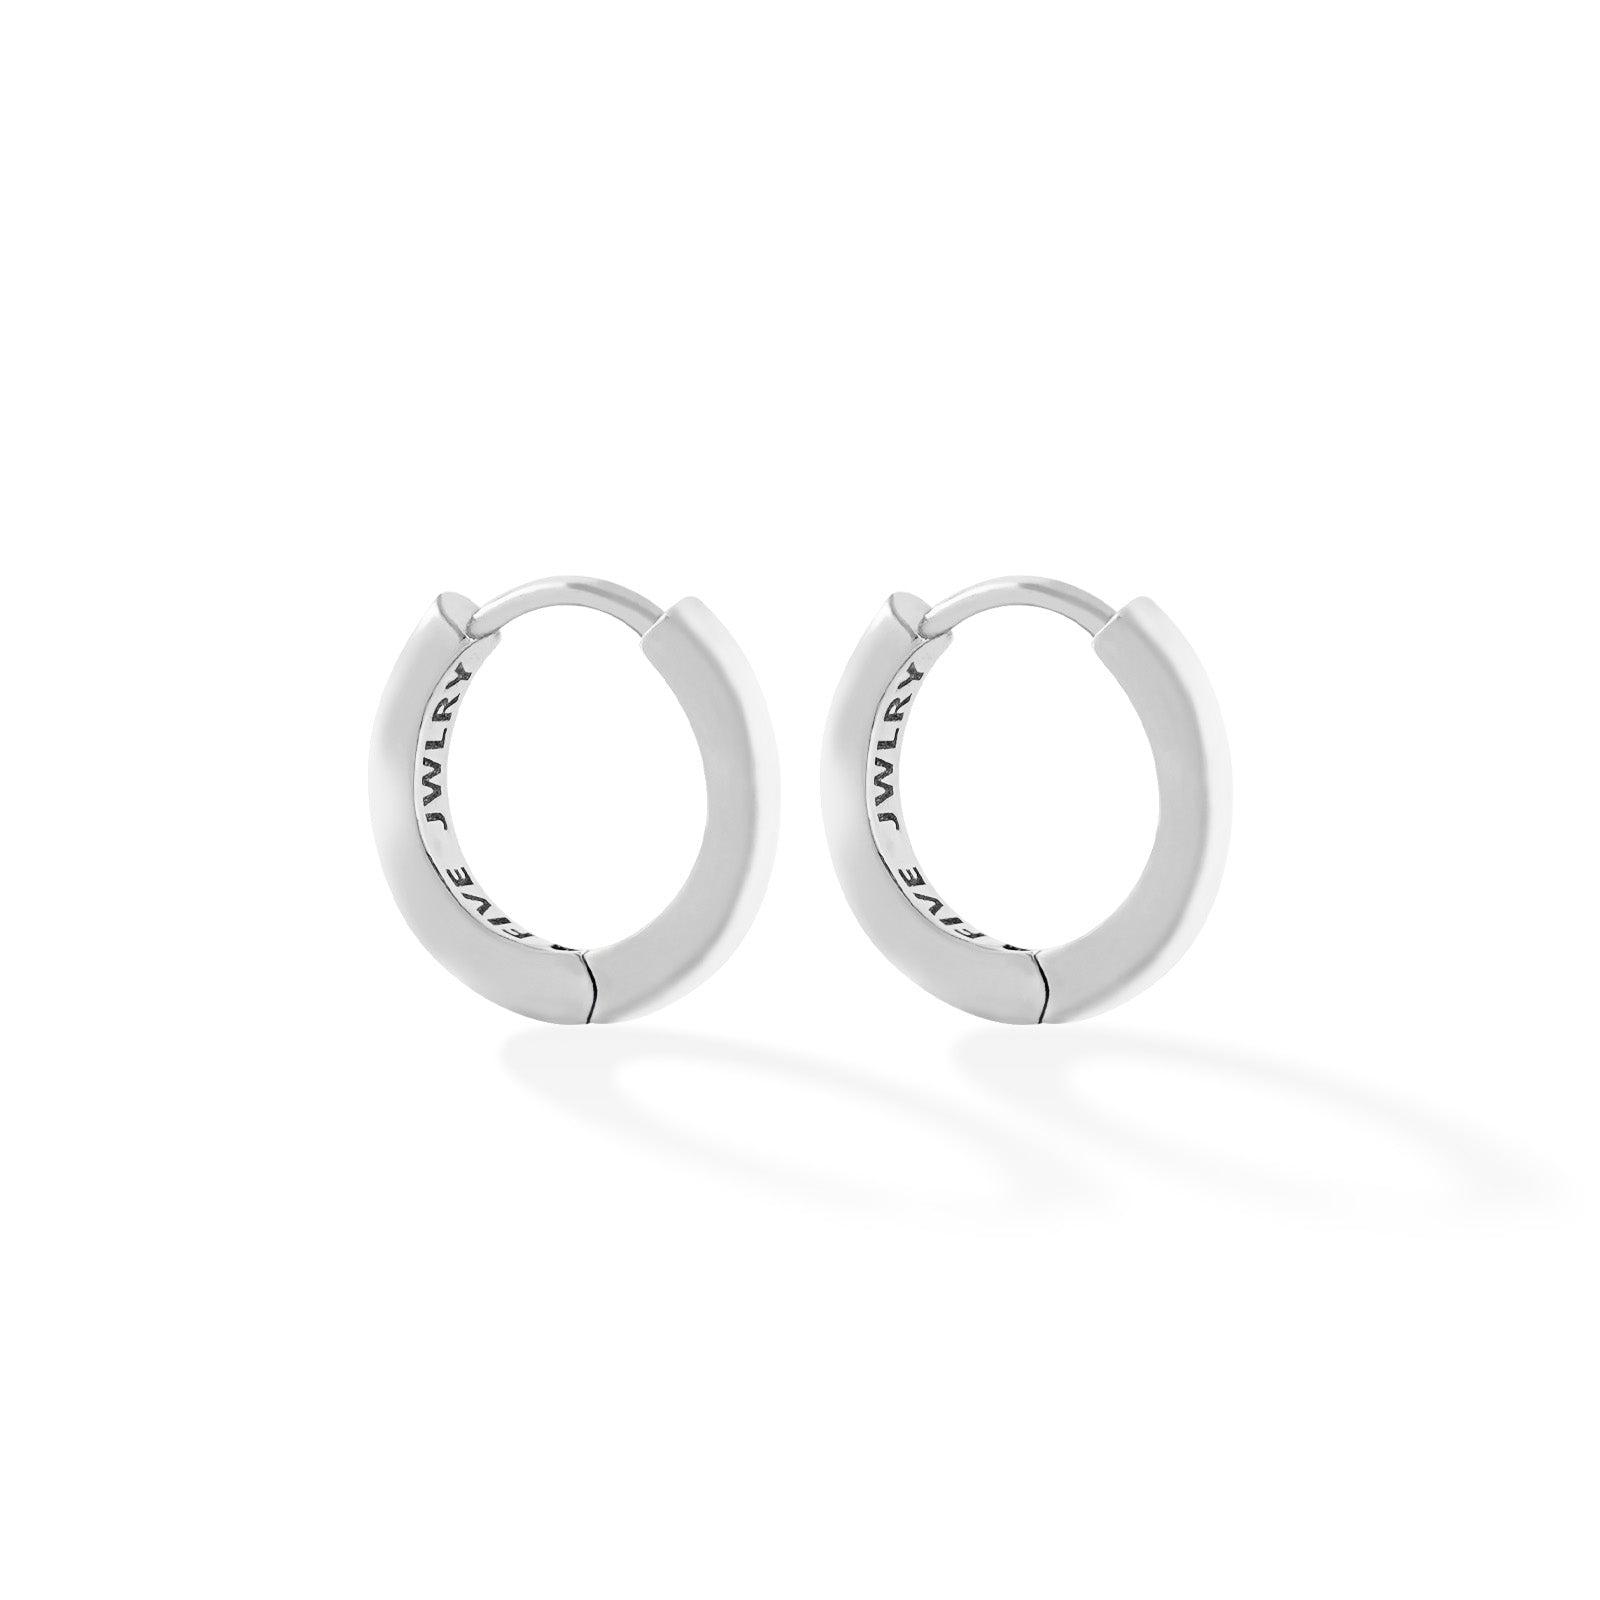 SOCA men's earring by Five Jwlry. A 13mm minimalist hoop, offering the choice of a single earring or a pair. Available in 14k gold or silver, crafted from water-resistant 316L stainless steel. Hypoallergenic with a 2-year warranty.